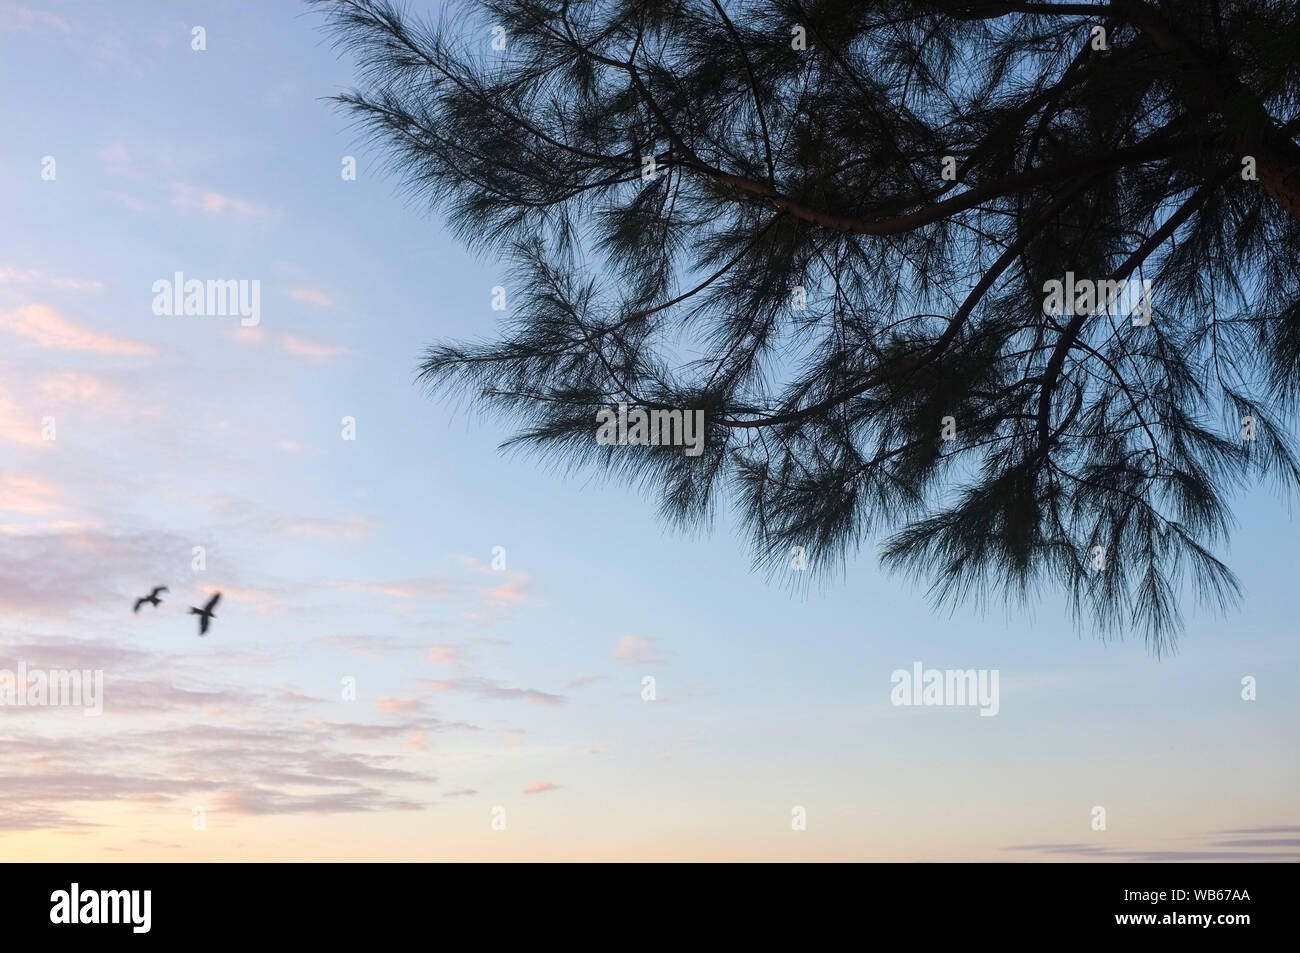 Tree branches silhoutte against an evening sky with two birds flying. Stock Photo